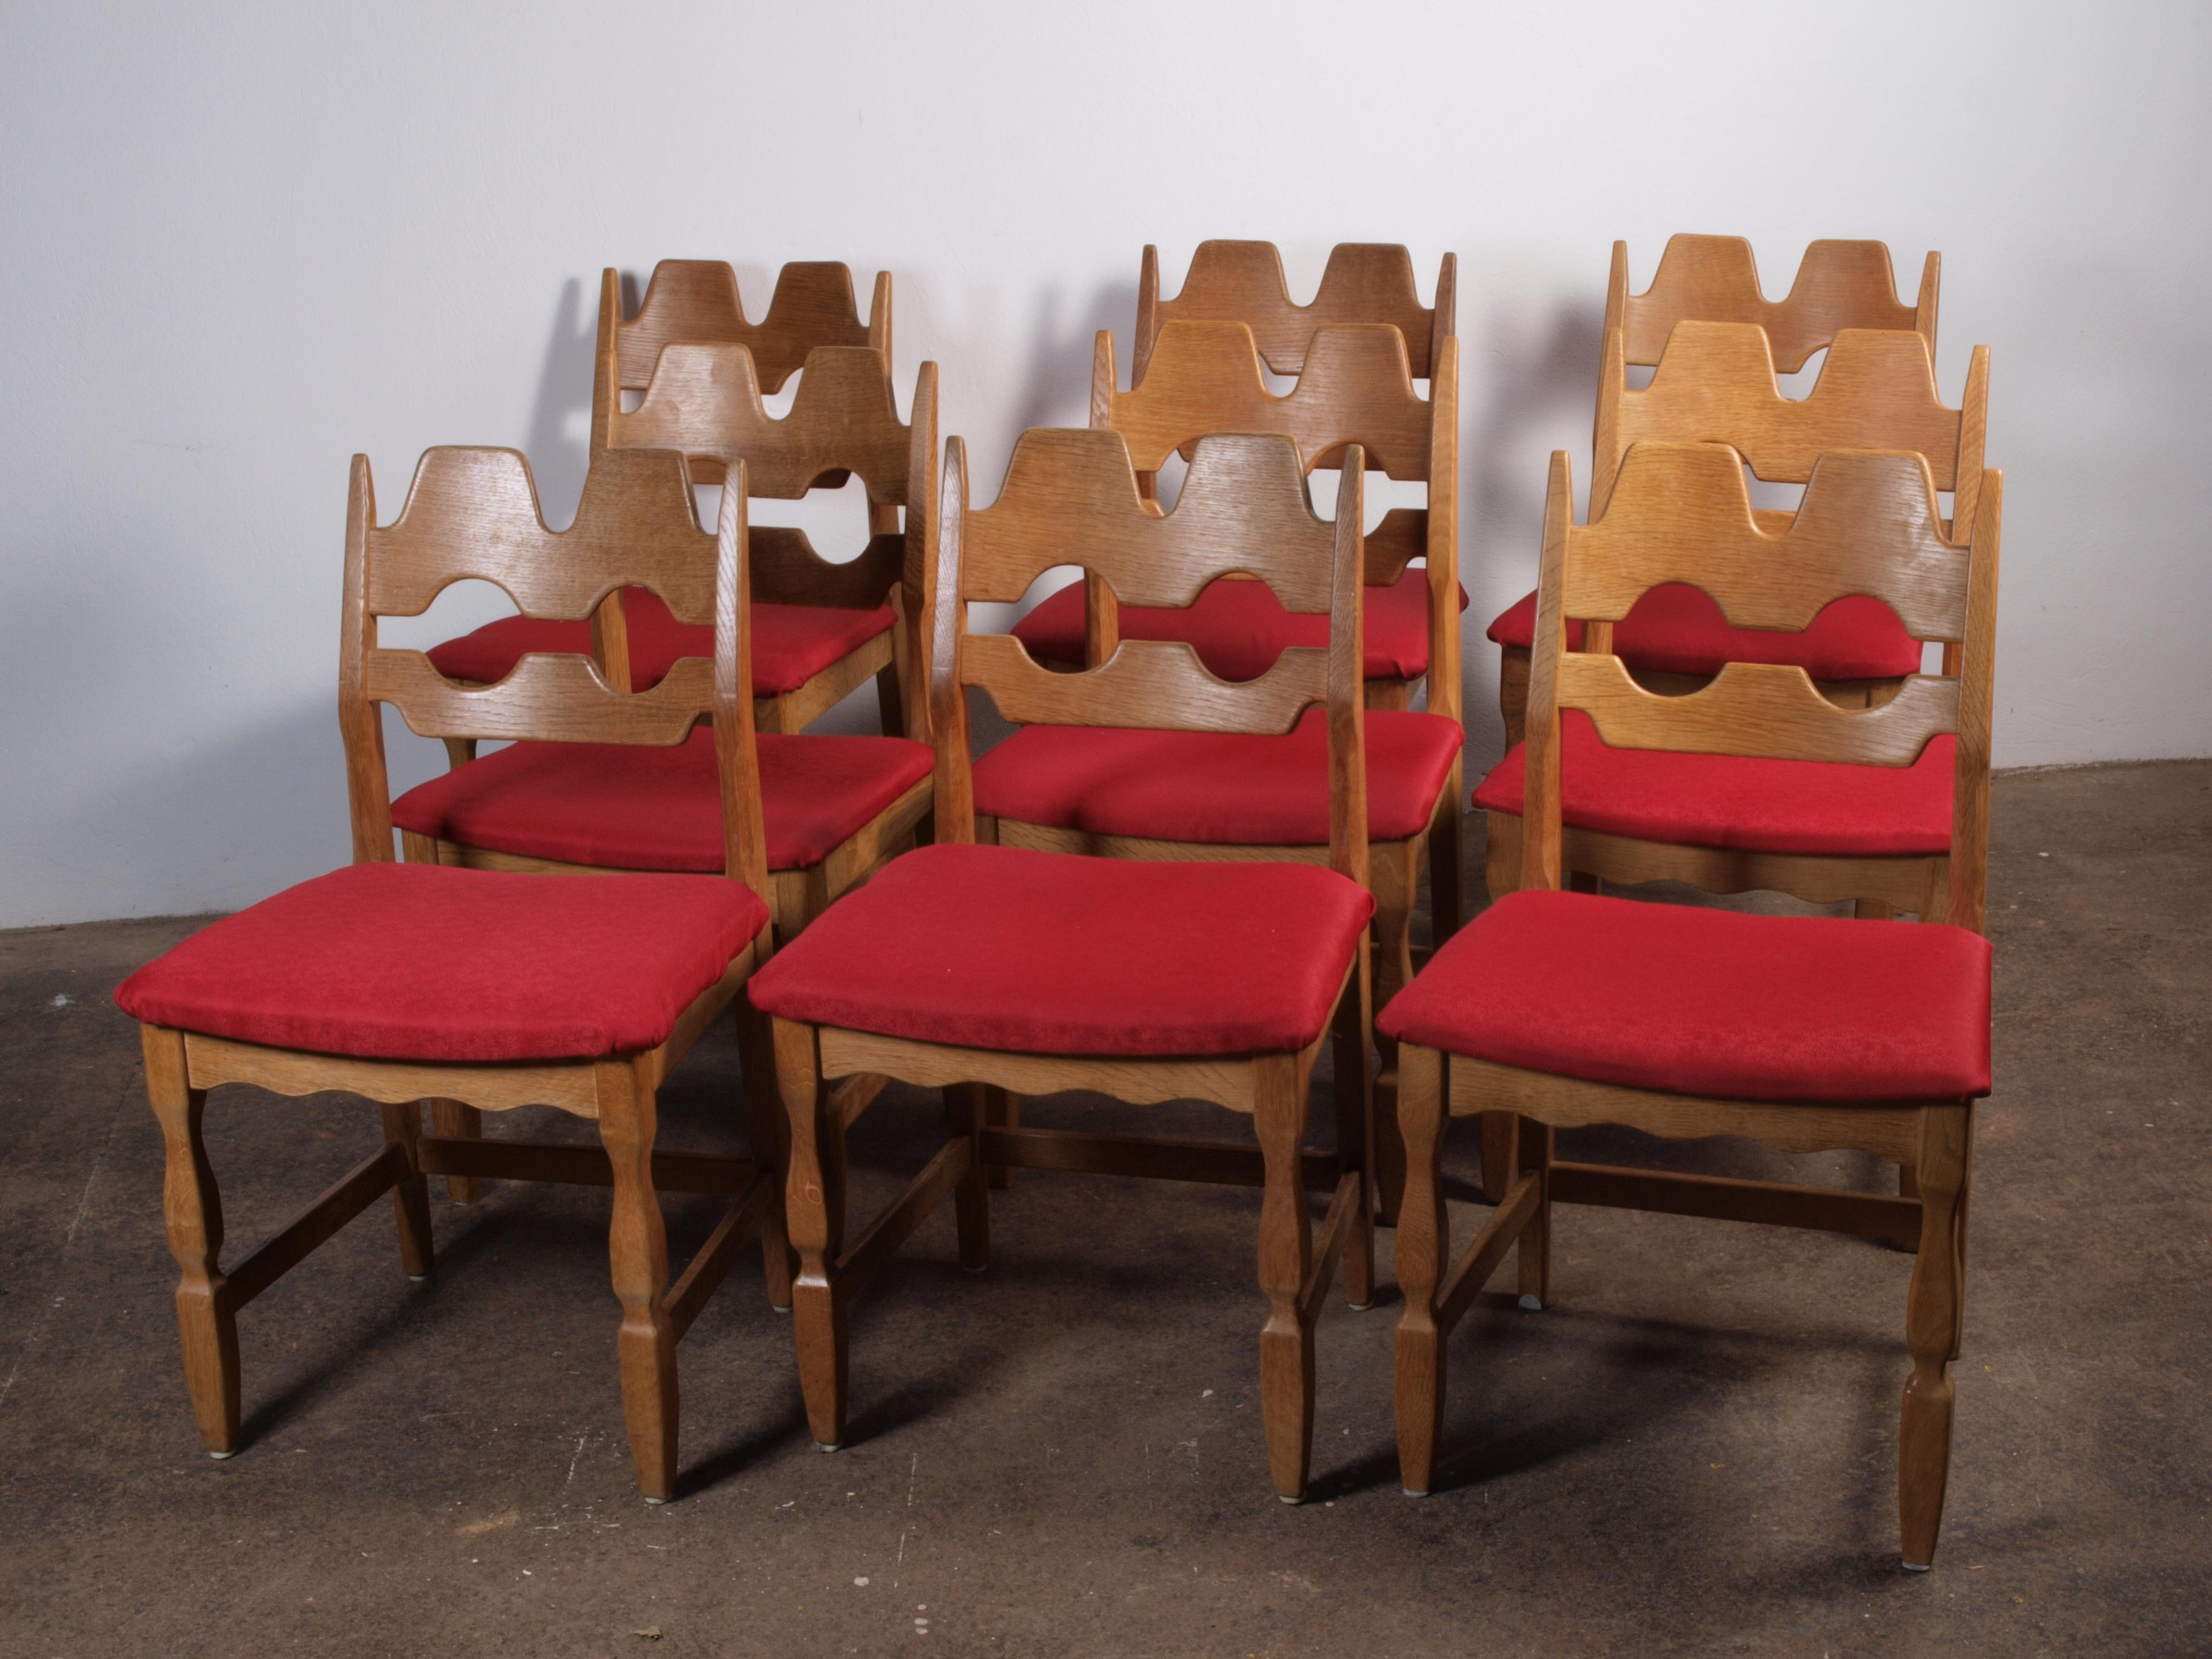 Henning Kjærnulf's striking dining chairs, crafted from oak and showcase a captivating blend of Baroque and Mid-Century Modern influences. Known as the Razorblade model, these classic chairs were produced by Nyrup Møbelfabrik during the 1960s-1970s.